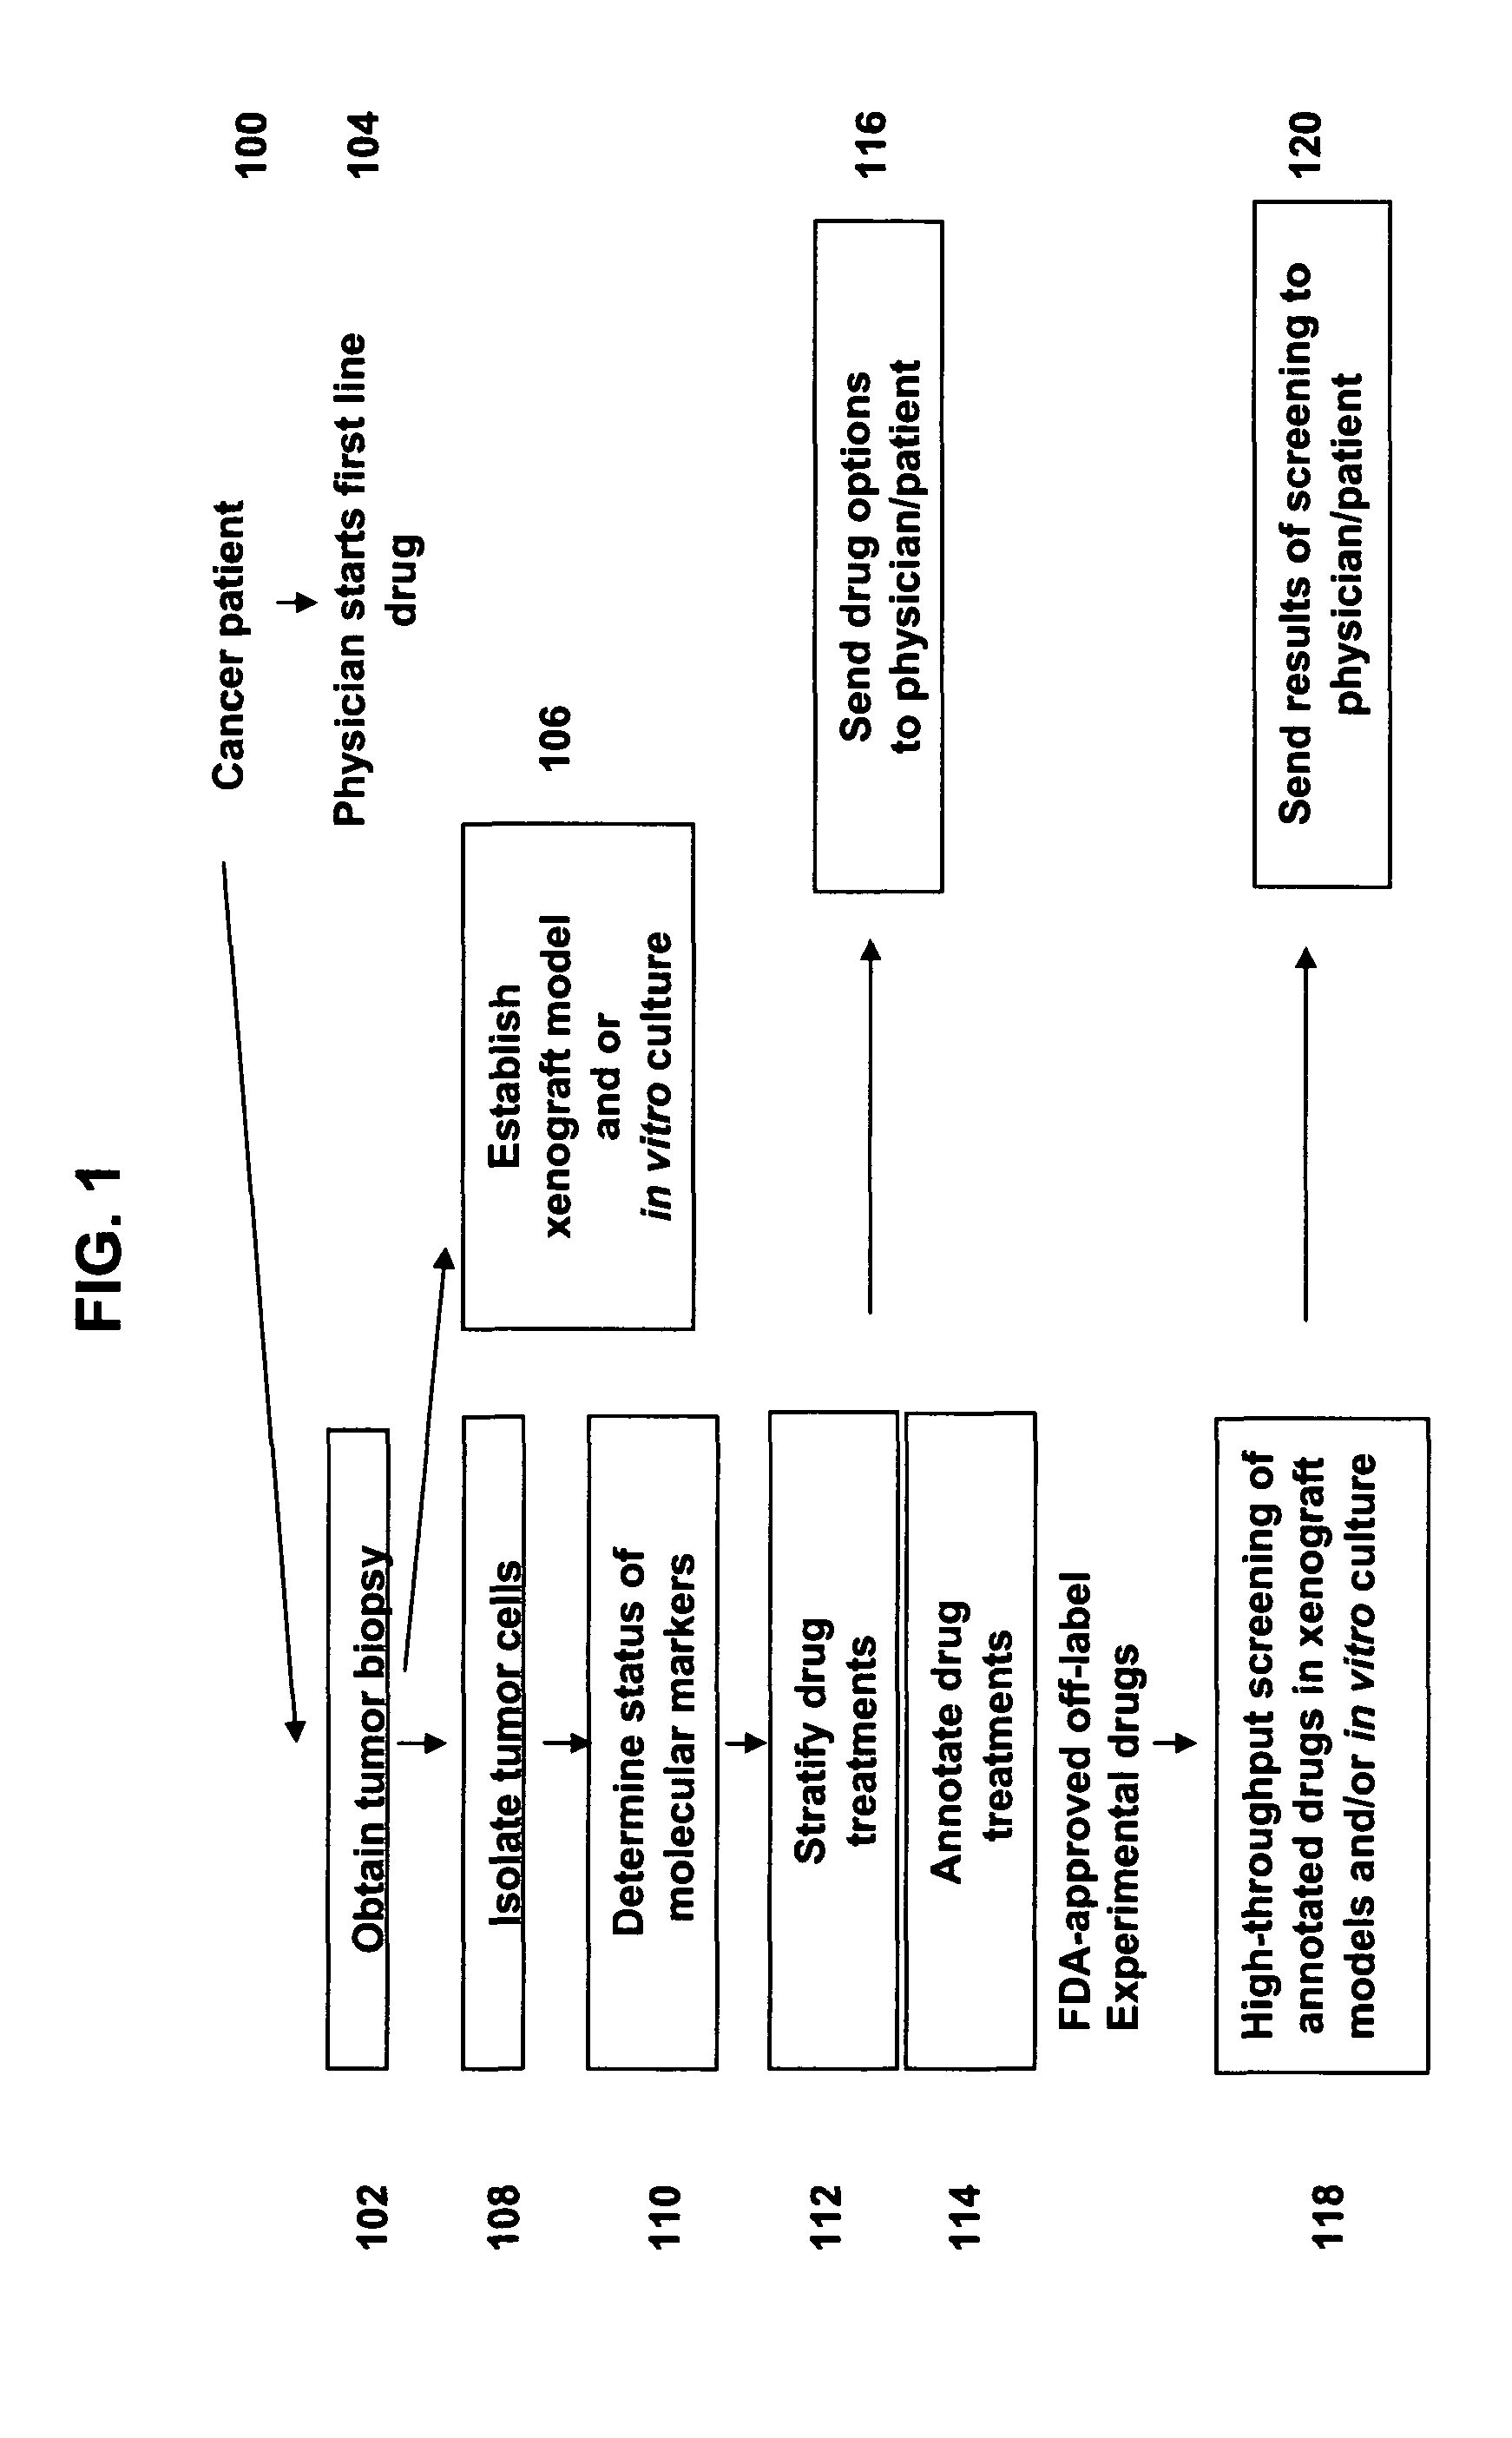 Methods for stratifying and annotating cancer drug treatment options